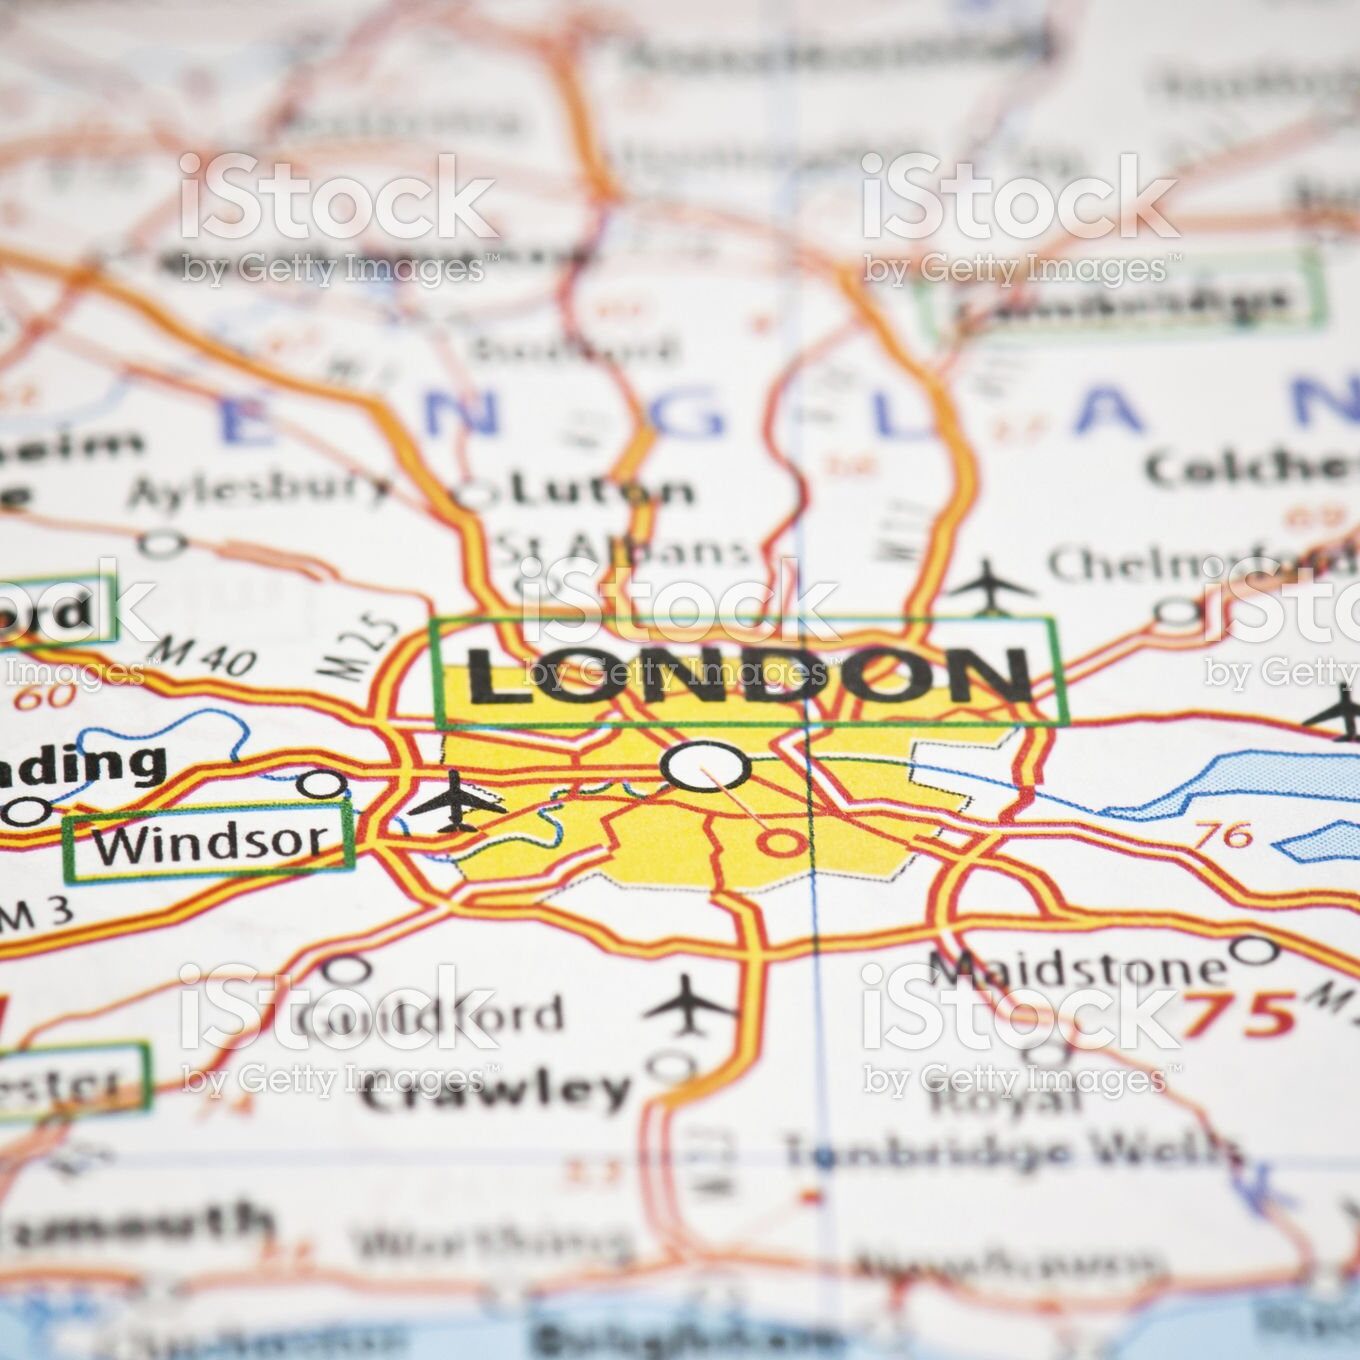 London on a map